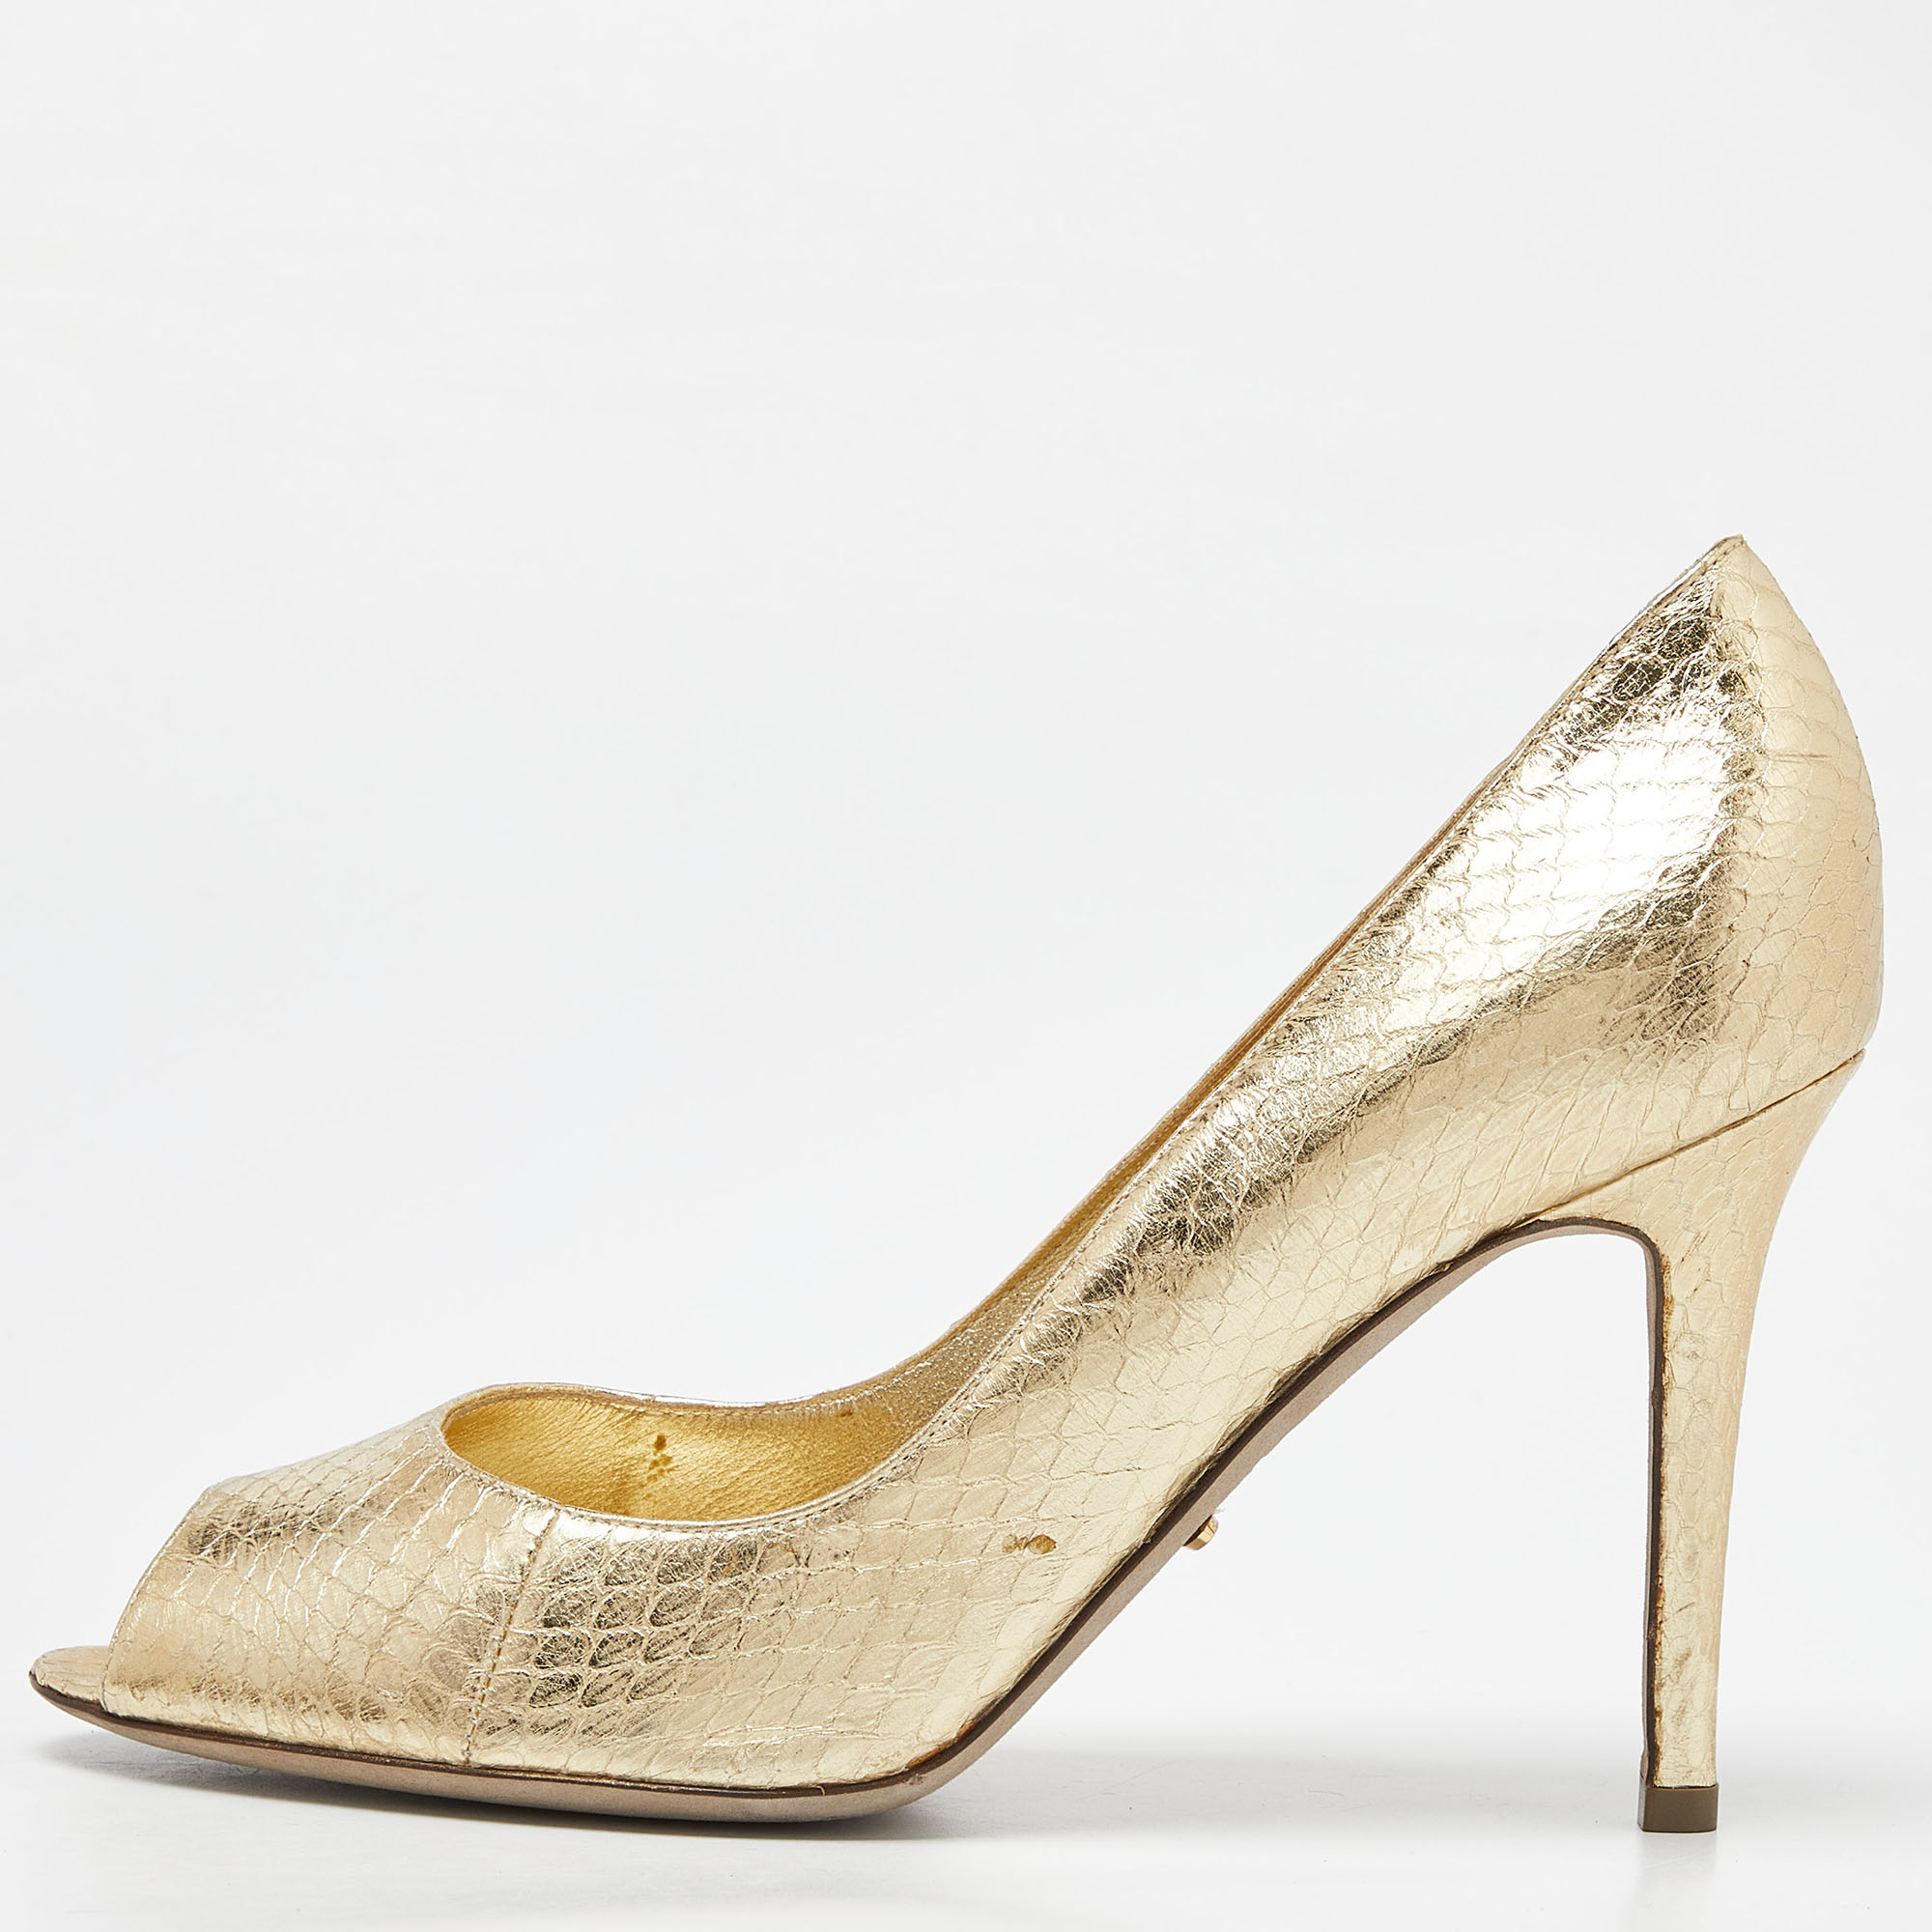 Exhibit an elegant style with this pair of Sergio Rossi gold pumps. These elegant shoes are crafted from quality materials and are set on durable soles and sleek heels.